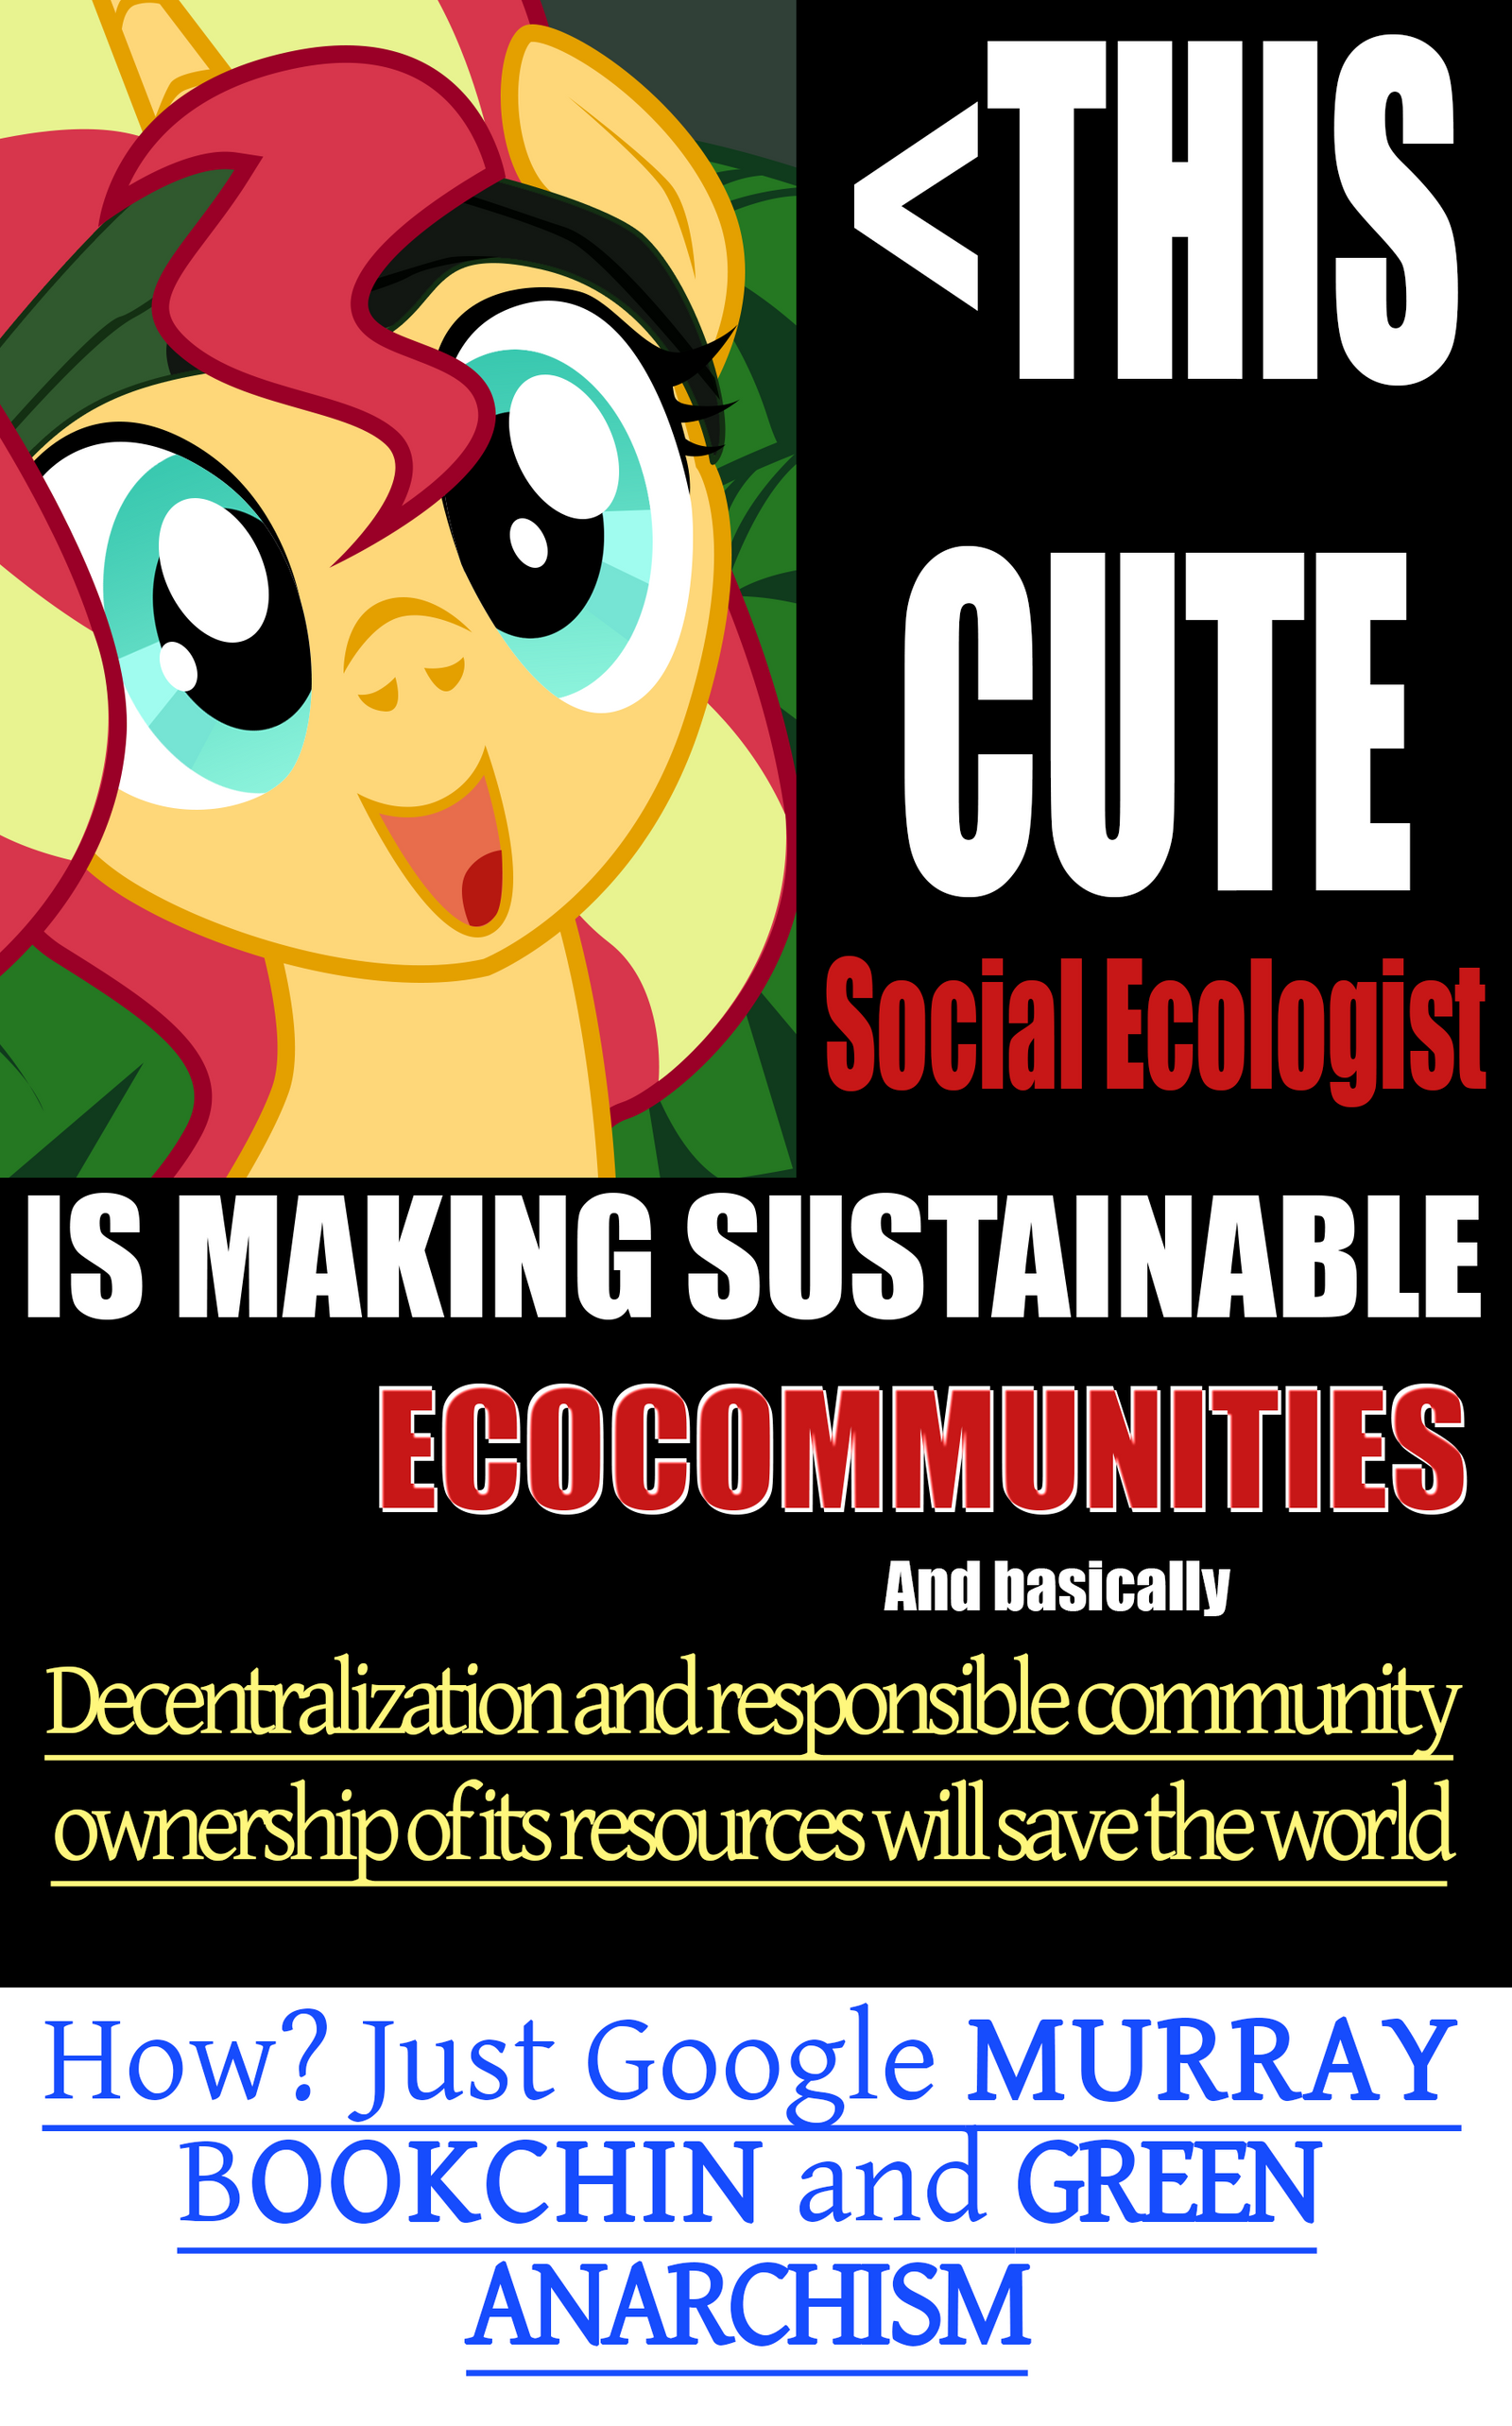 this_cute_social_ecologist_by_aaronmk-db